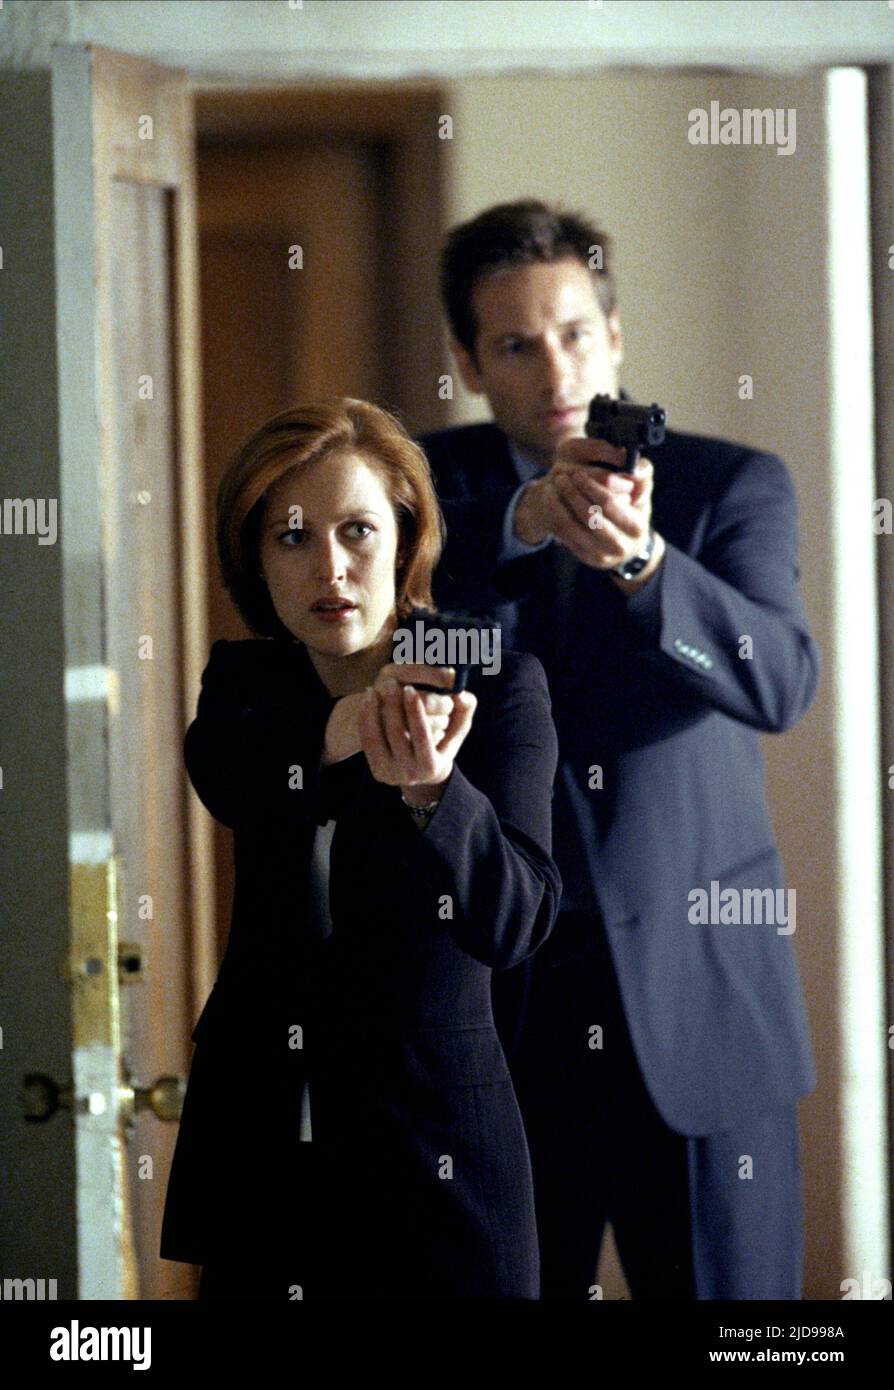 ANDERSON,DUCHOVNY, THE X FILES, 1993, Stock Photo